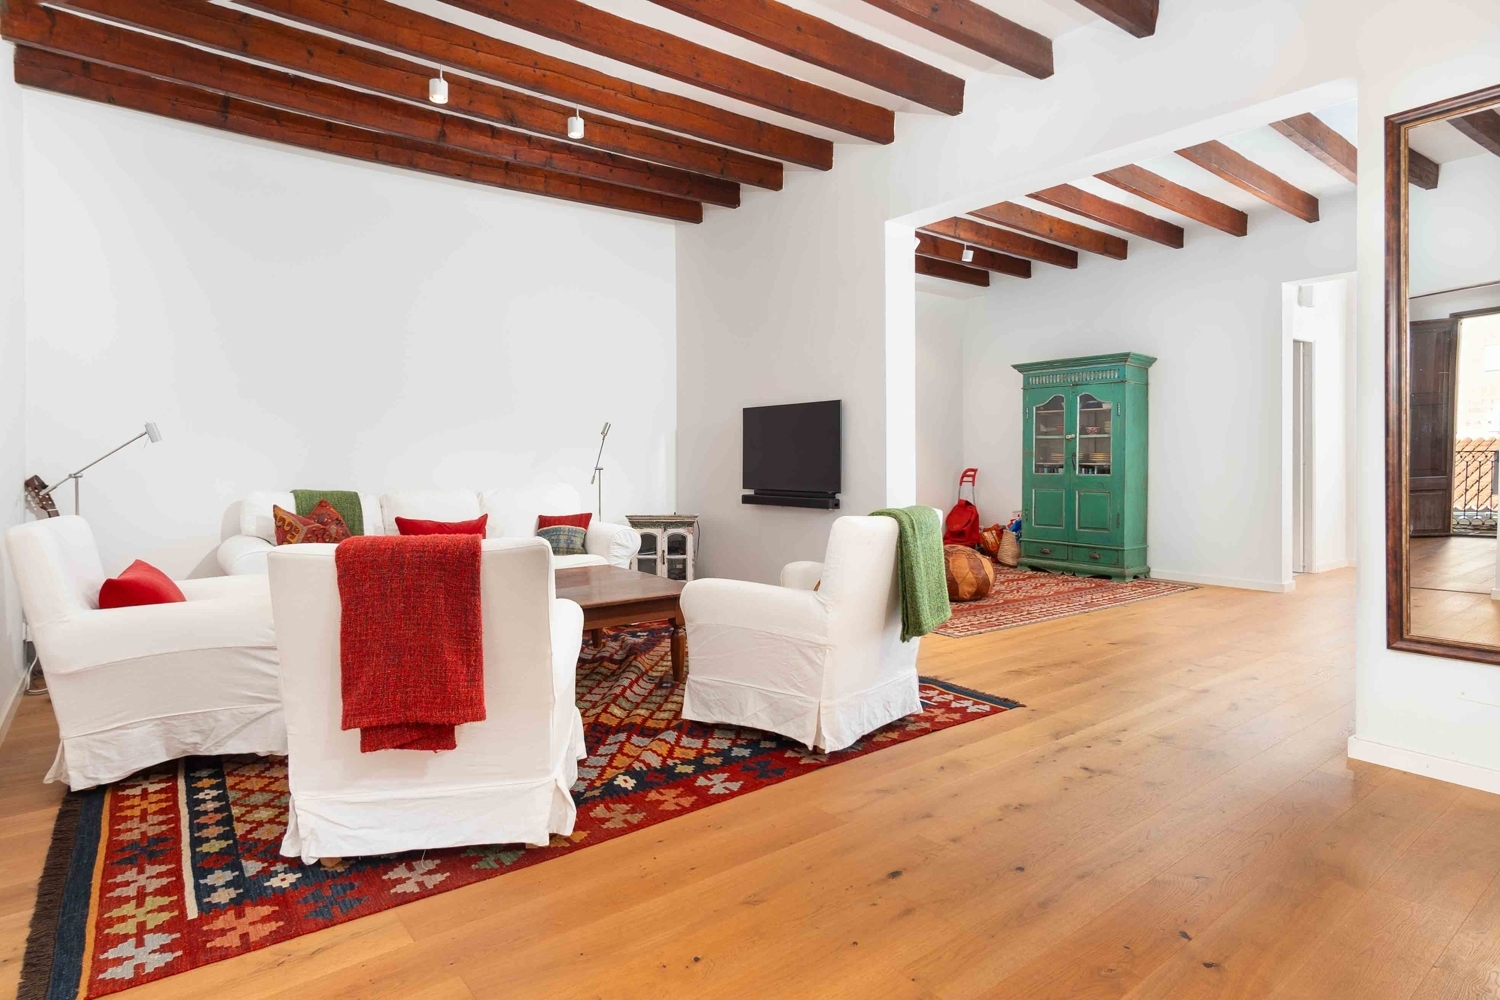 Captivating duplex penthouse apartment with private terrace in the heart of Santa Catalina